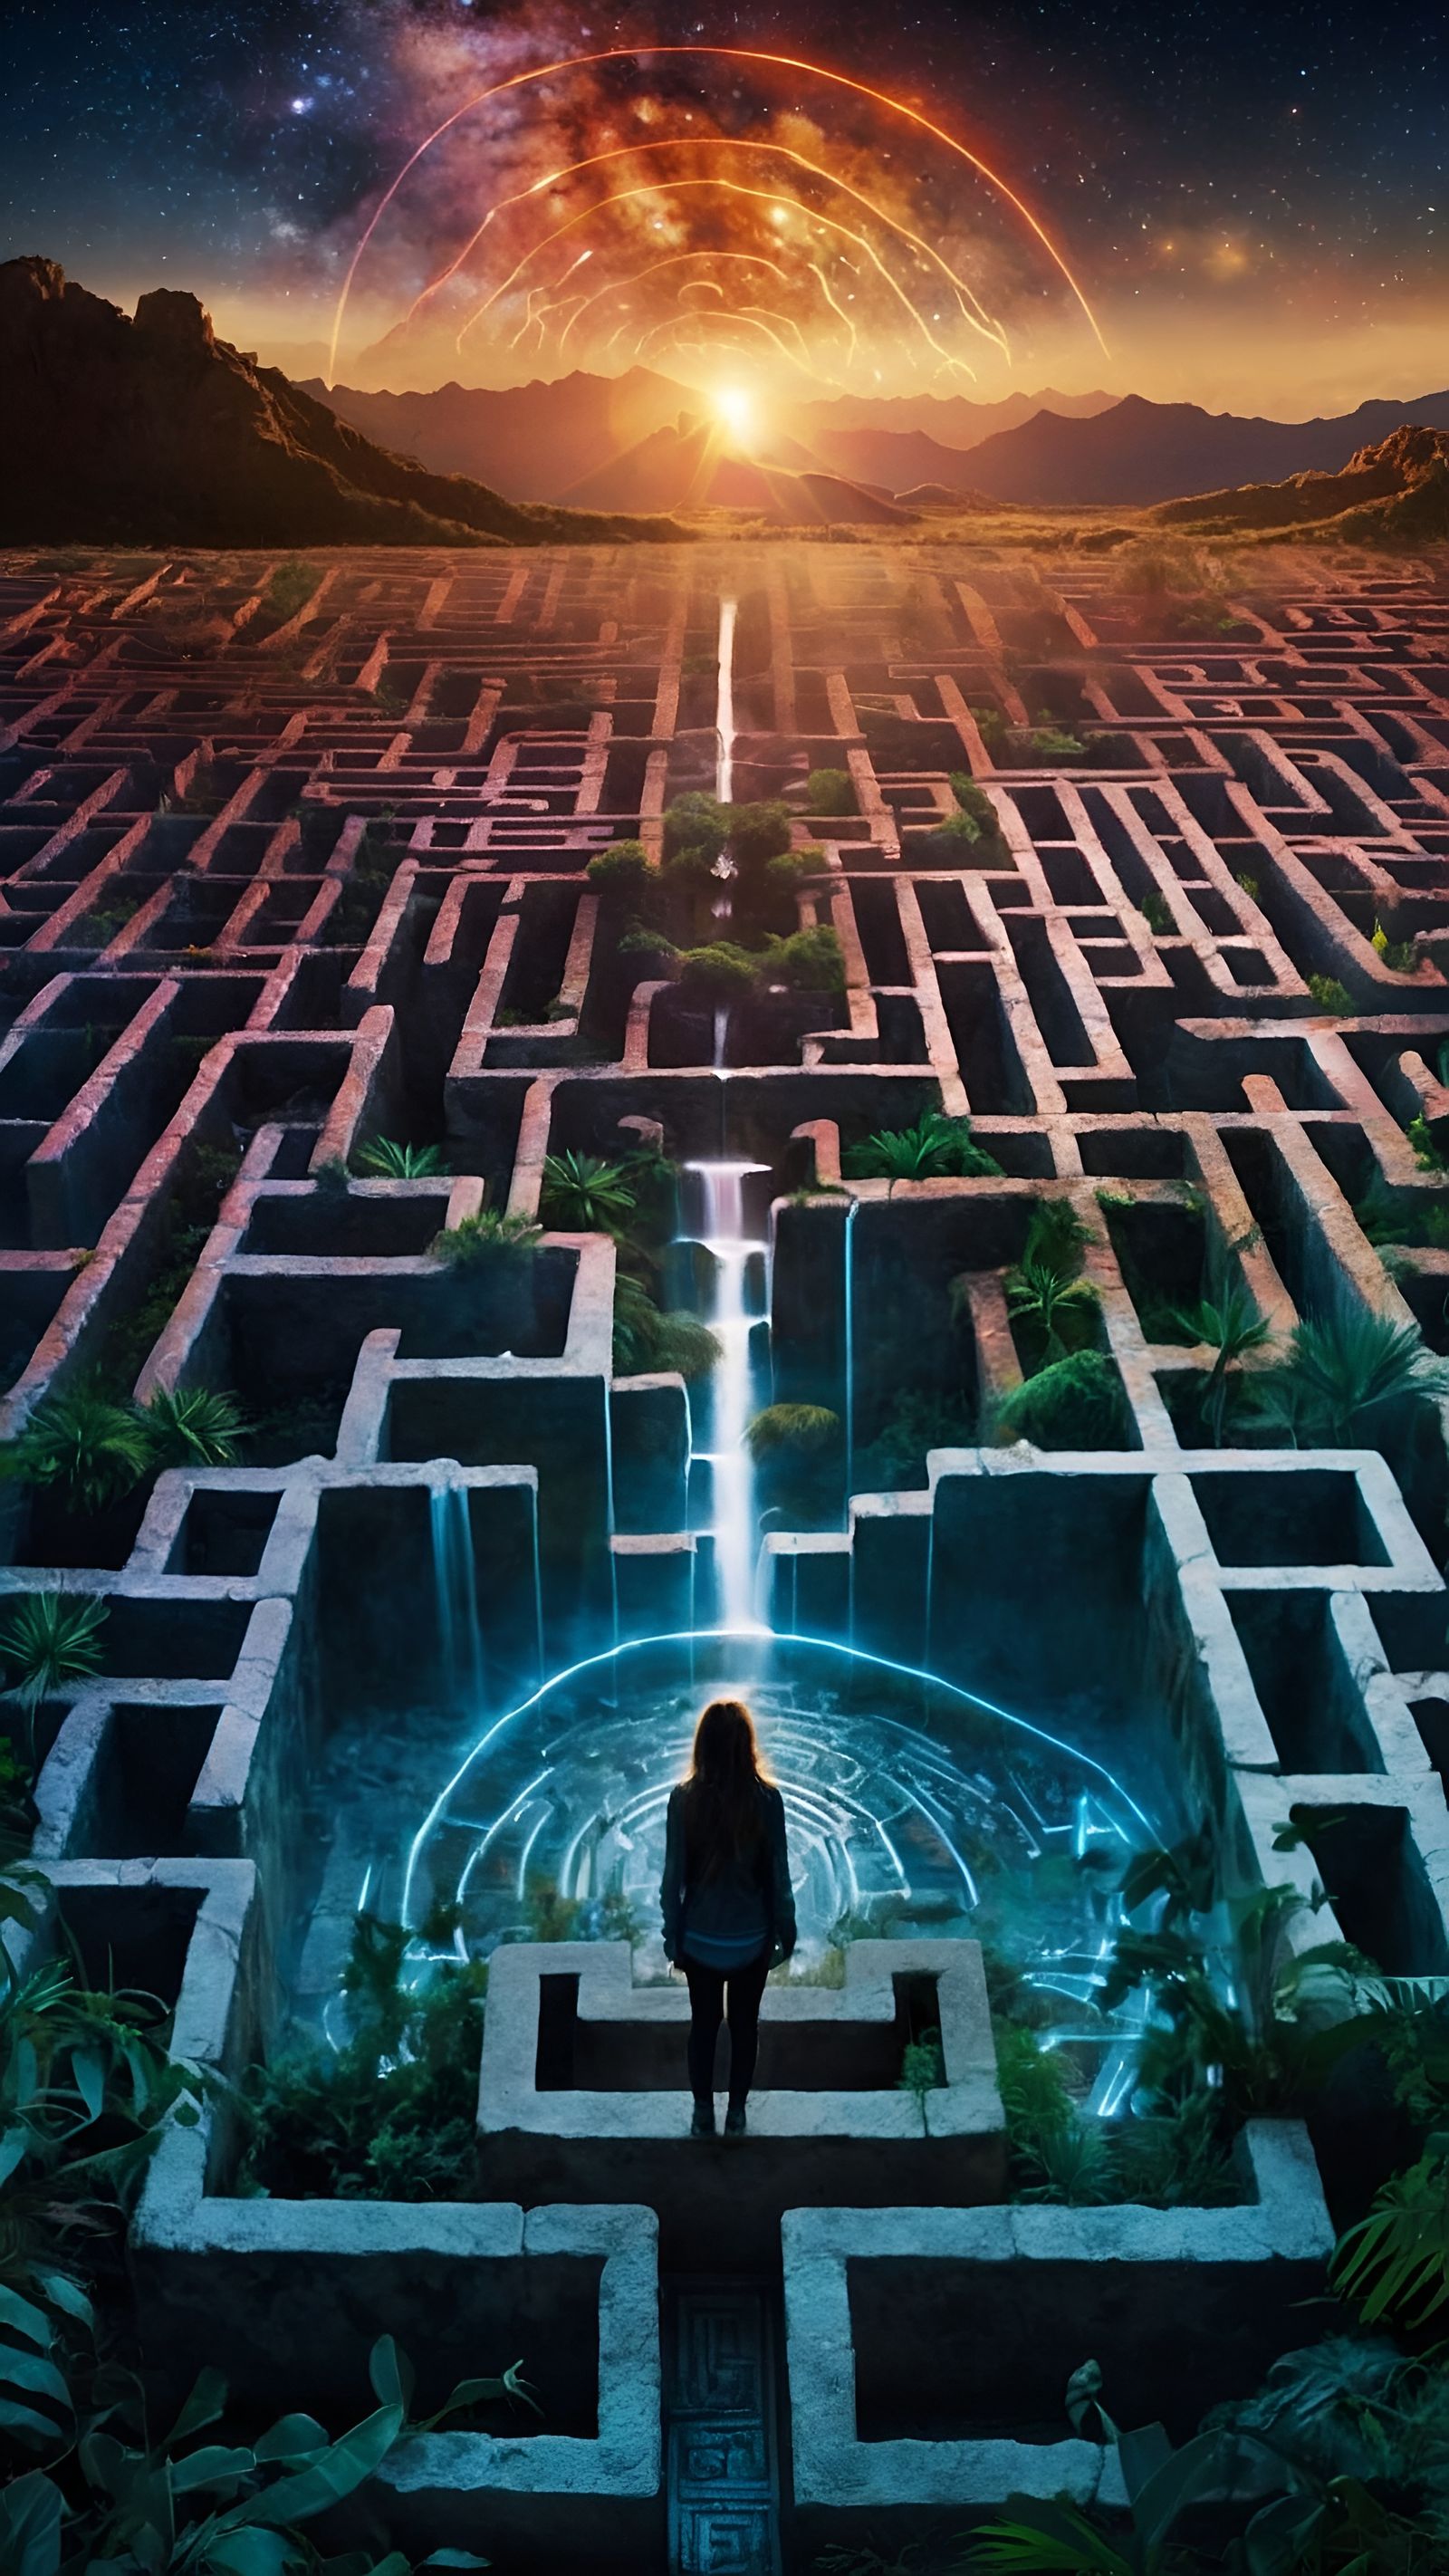 Outsmarting the Maze